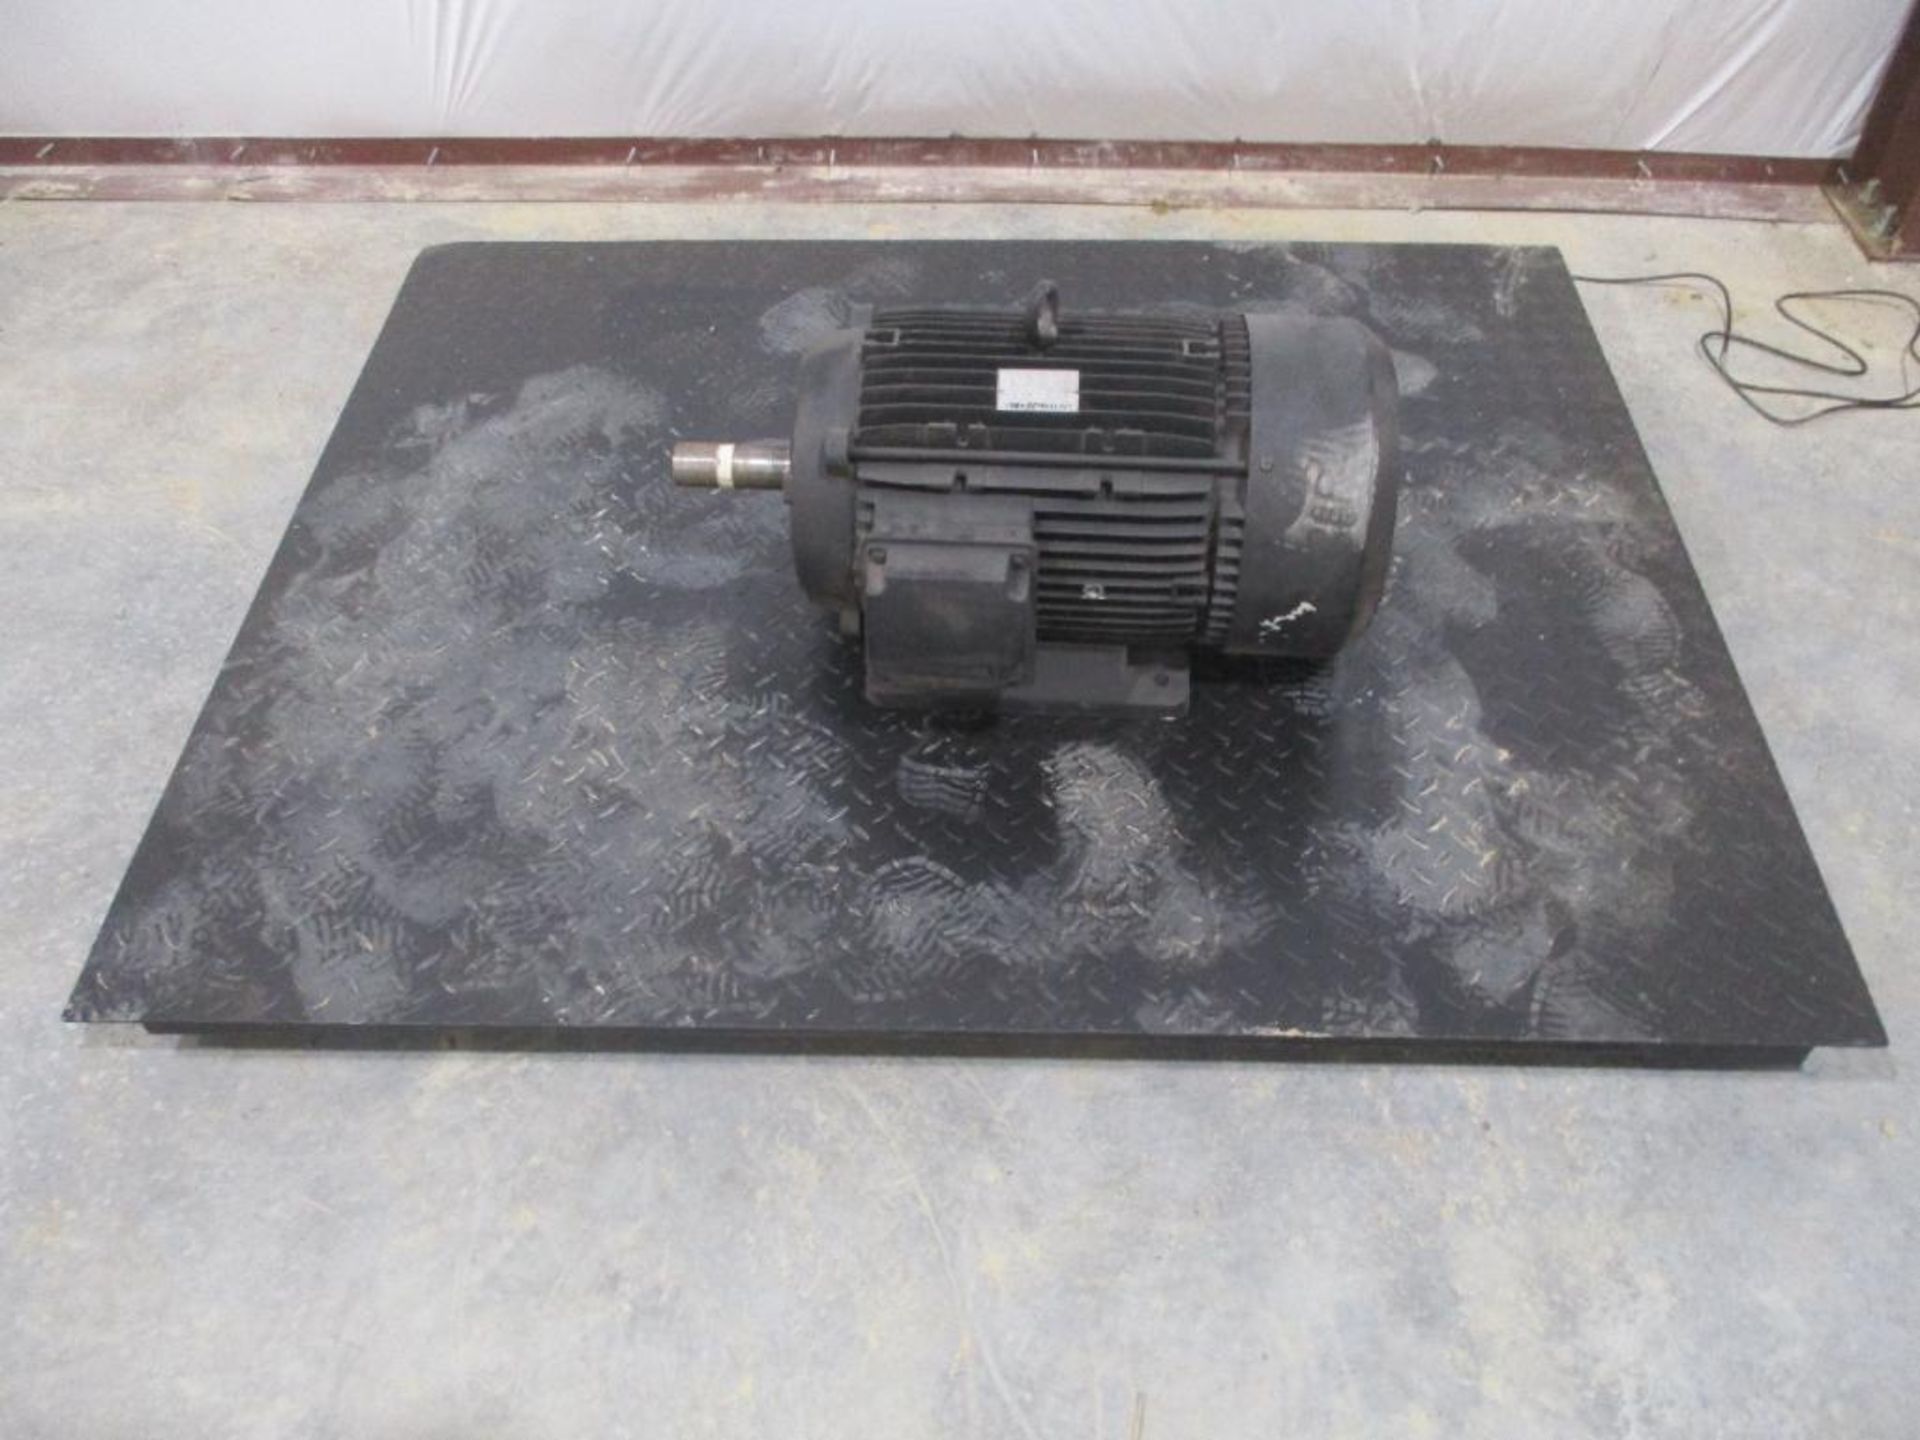 LAFERT 20HP 1475-1770RPM A/C MOTOR P/N AAMH160LZA4, 287# lbs (There will be a $40 Rigging/Prep fee a